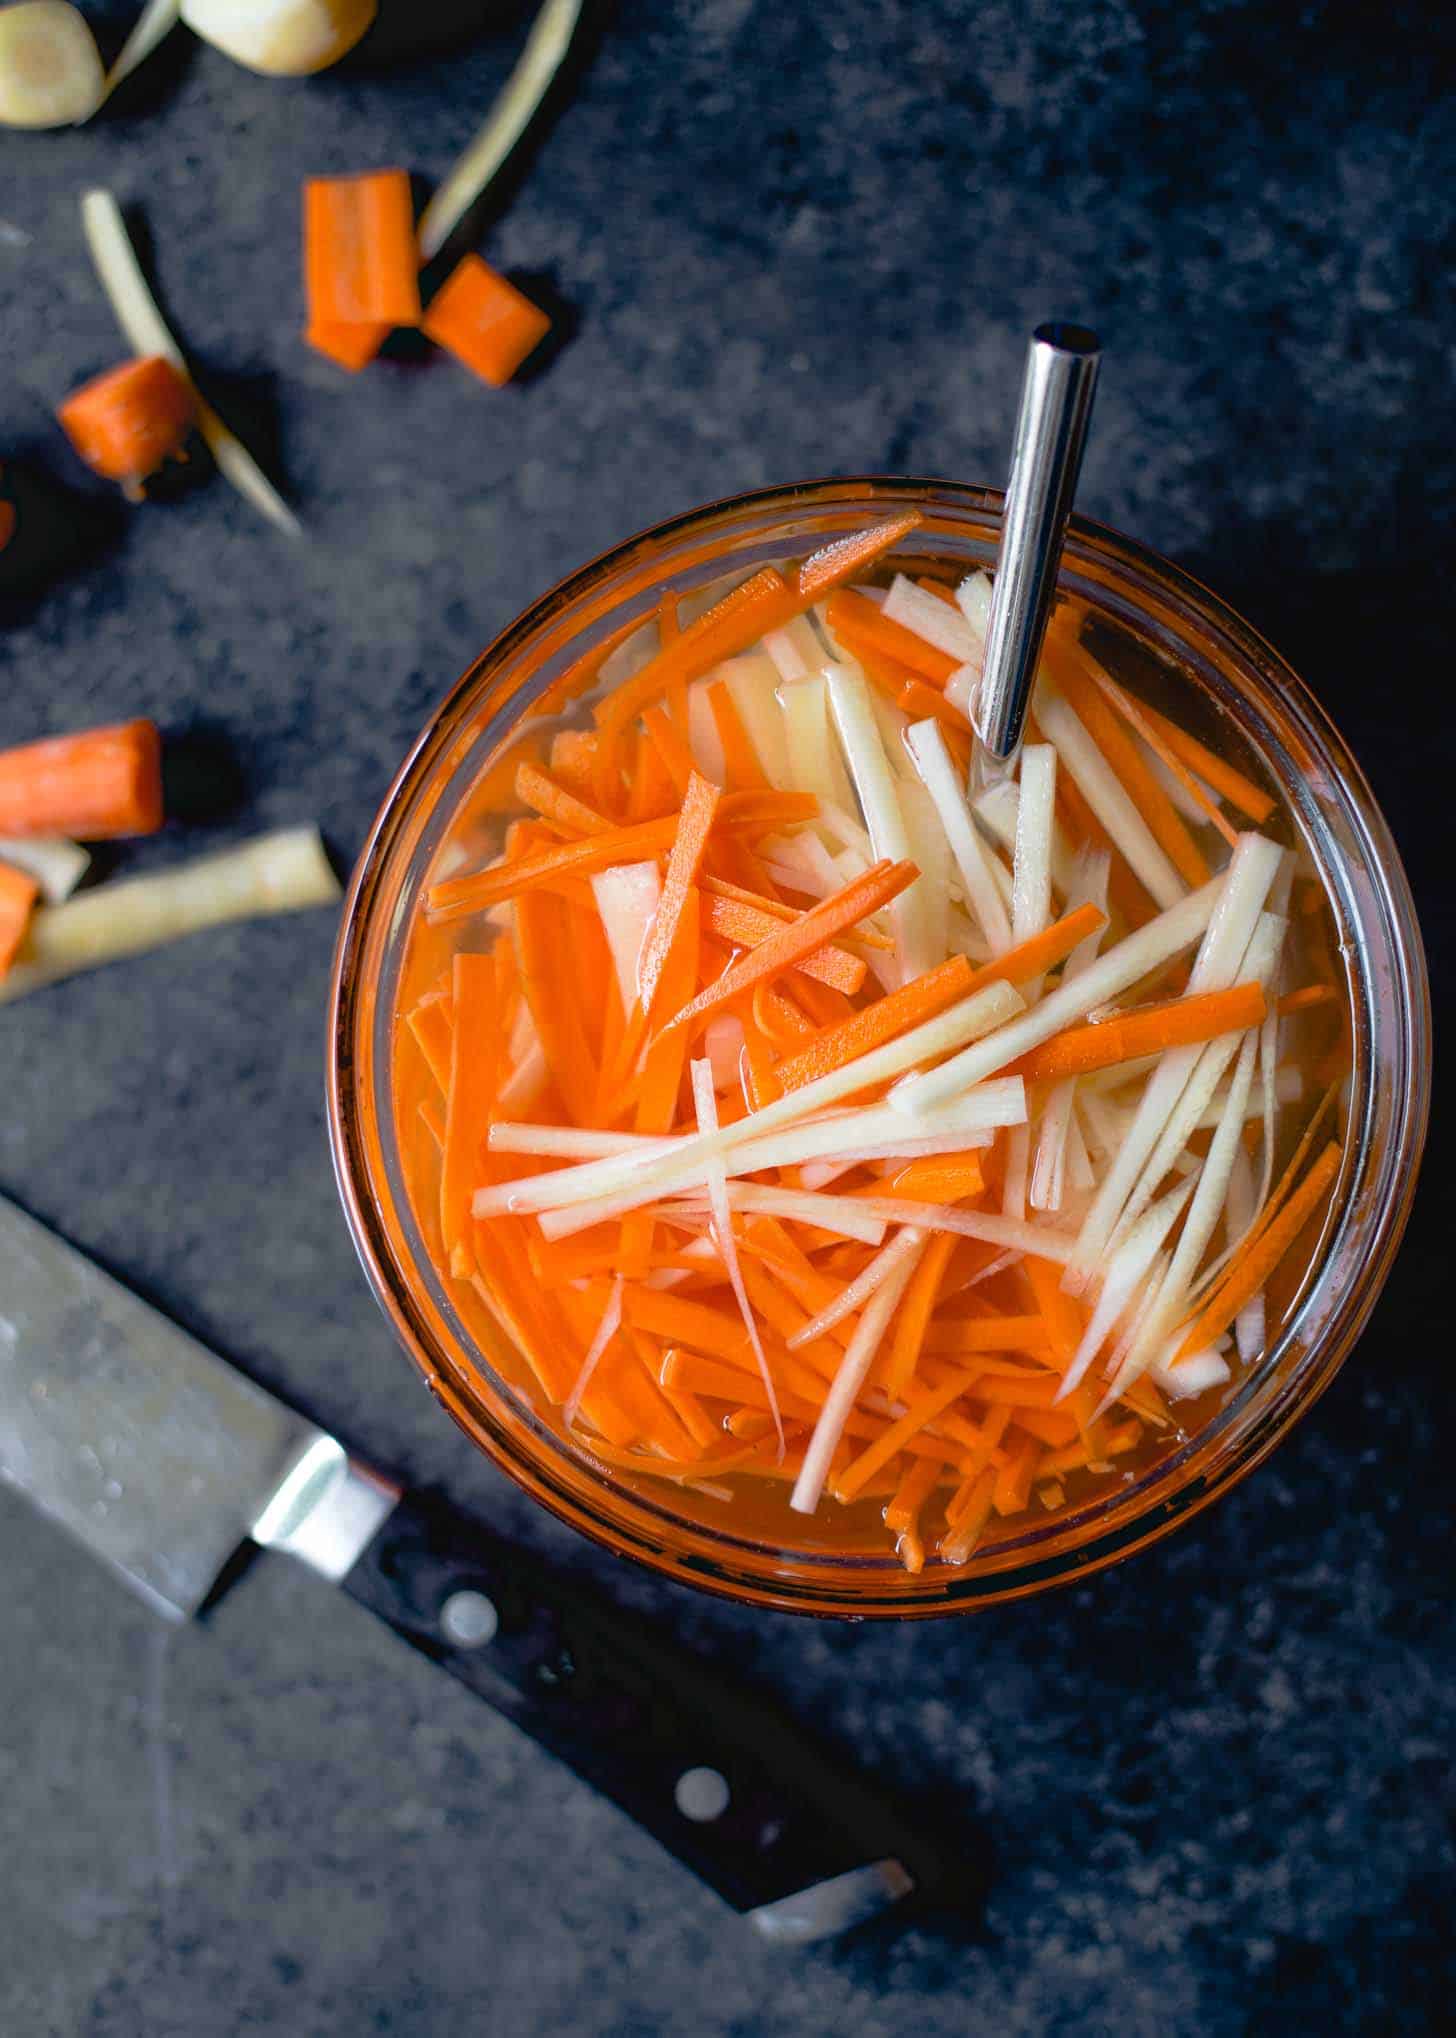 sliced carrots and Daikon radishes in a glass bowl